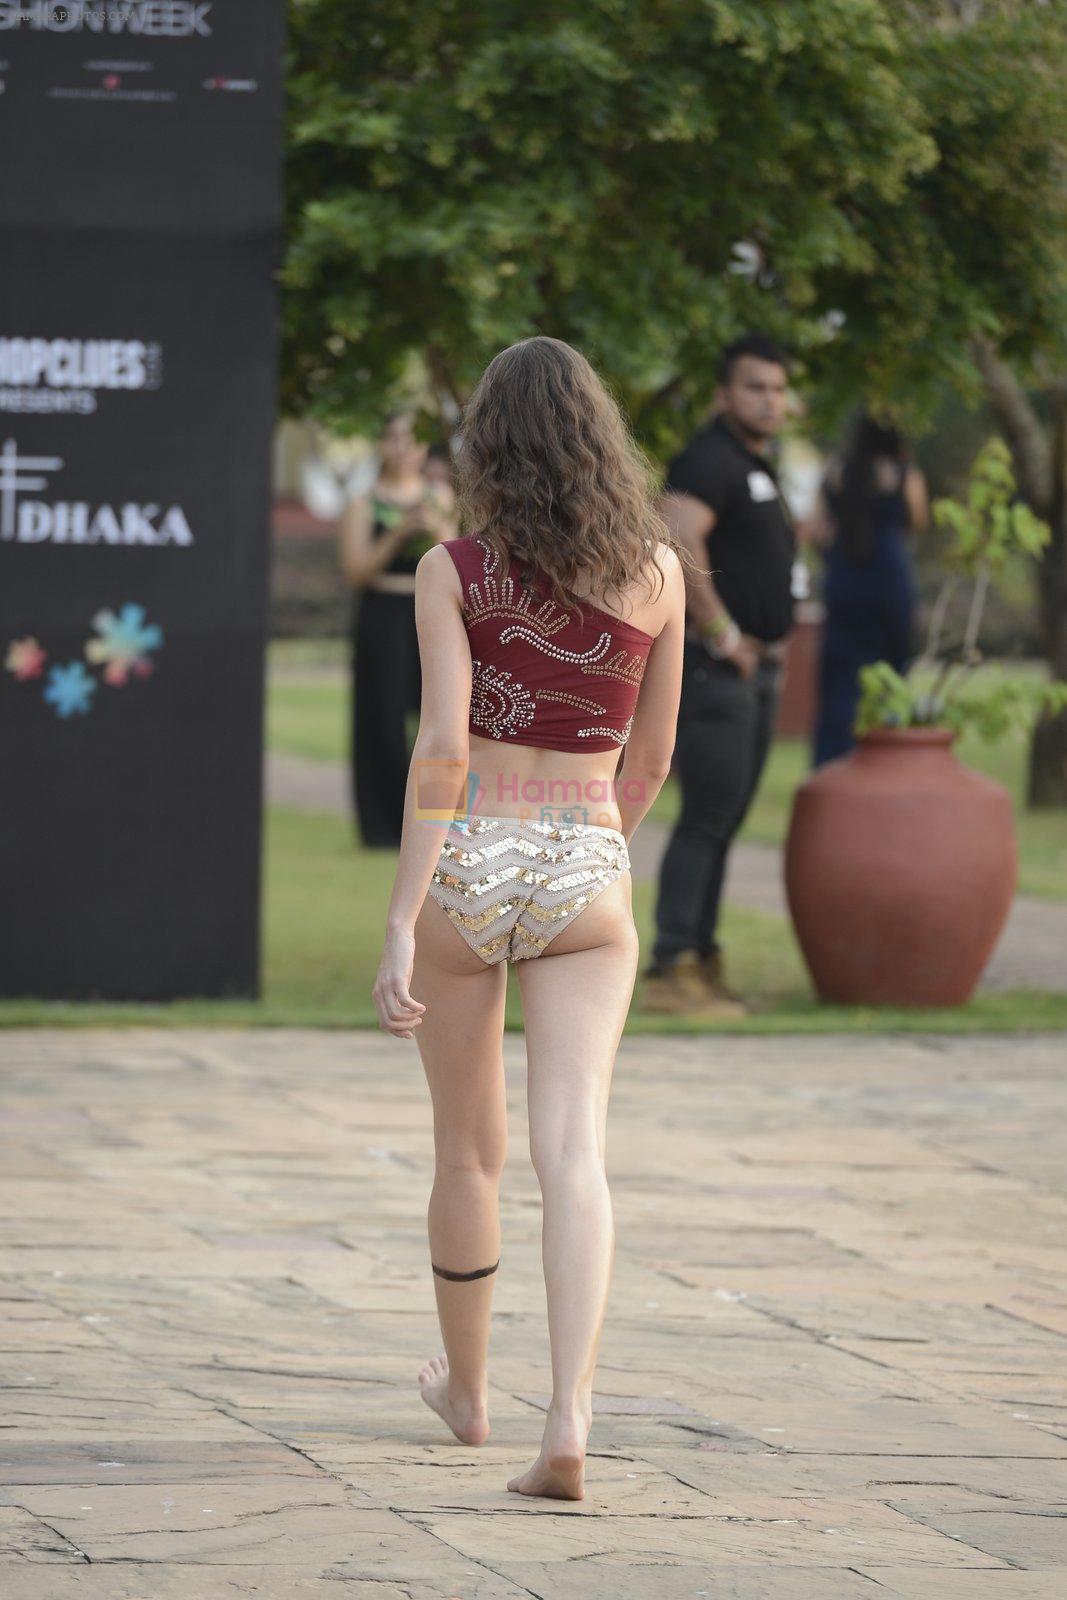 Model walk the ramp for Rina Dhaka Show on day 2 of Gionee India Beach Fashion Week on 30th Oct 2015